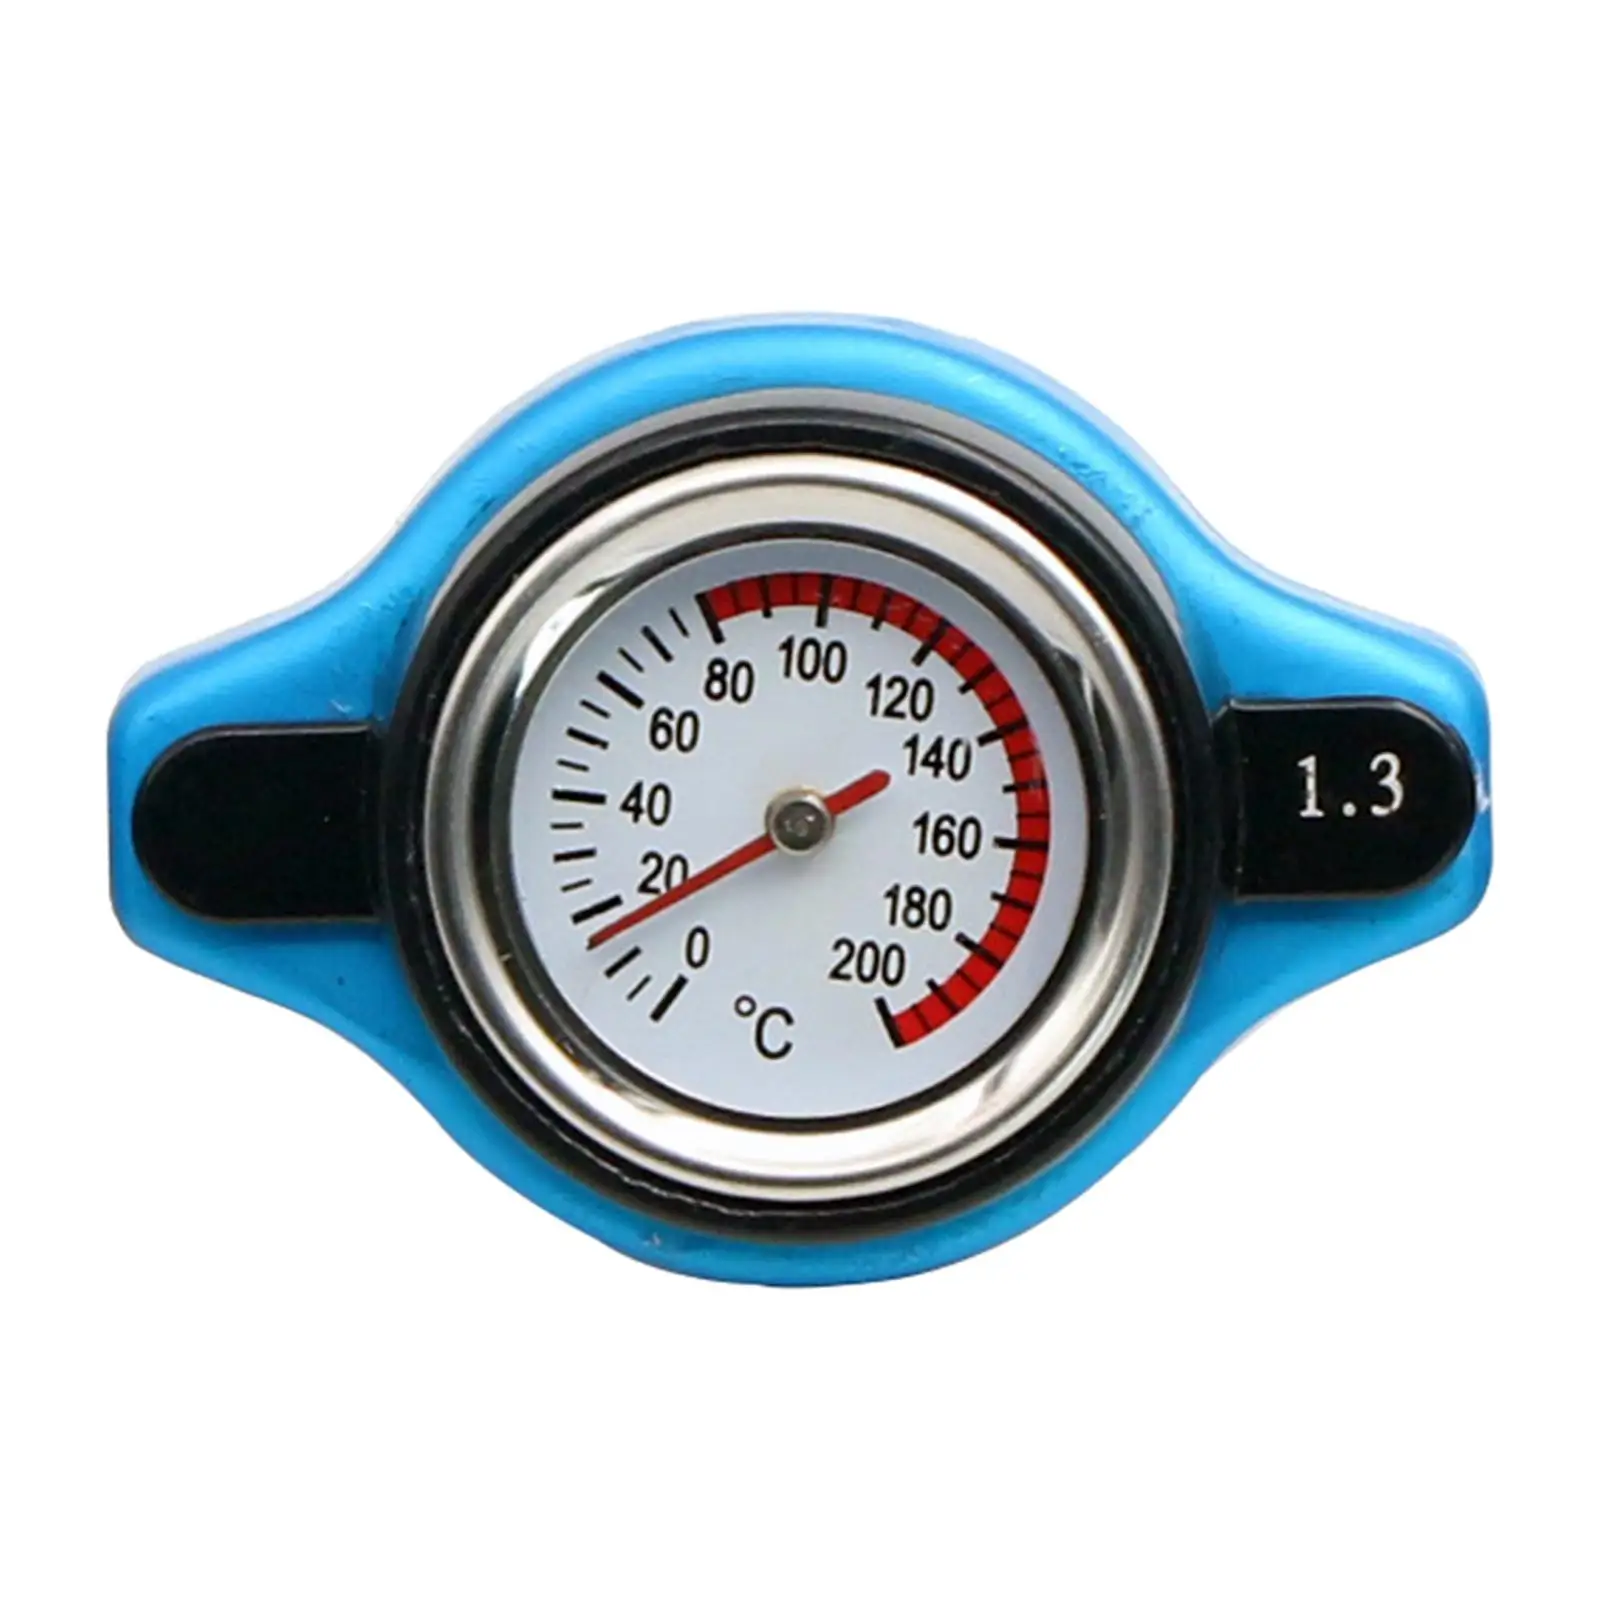 Thermostatic Cap Cover Water Temp Gauge Meter Easy to Install Aluminum Alloy Durable Accessory Replacement Parts Universal